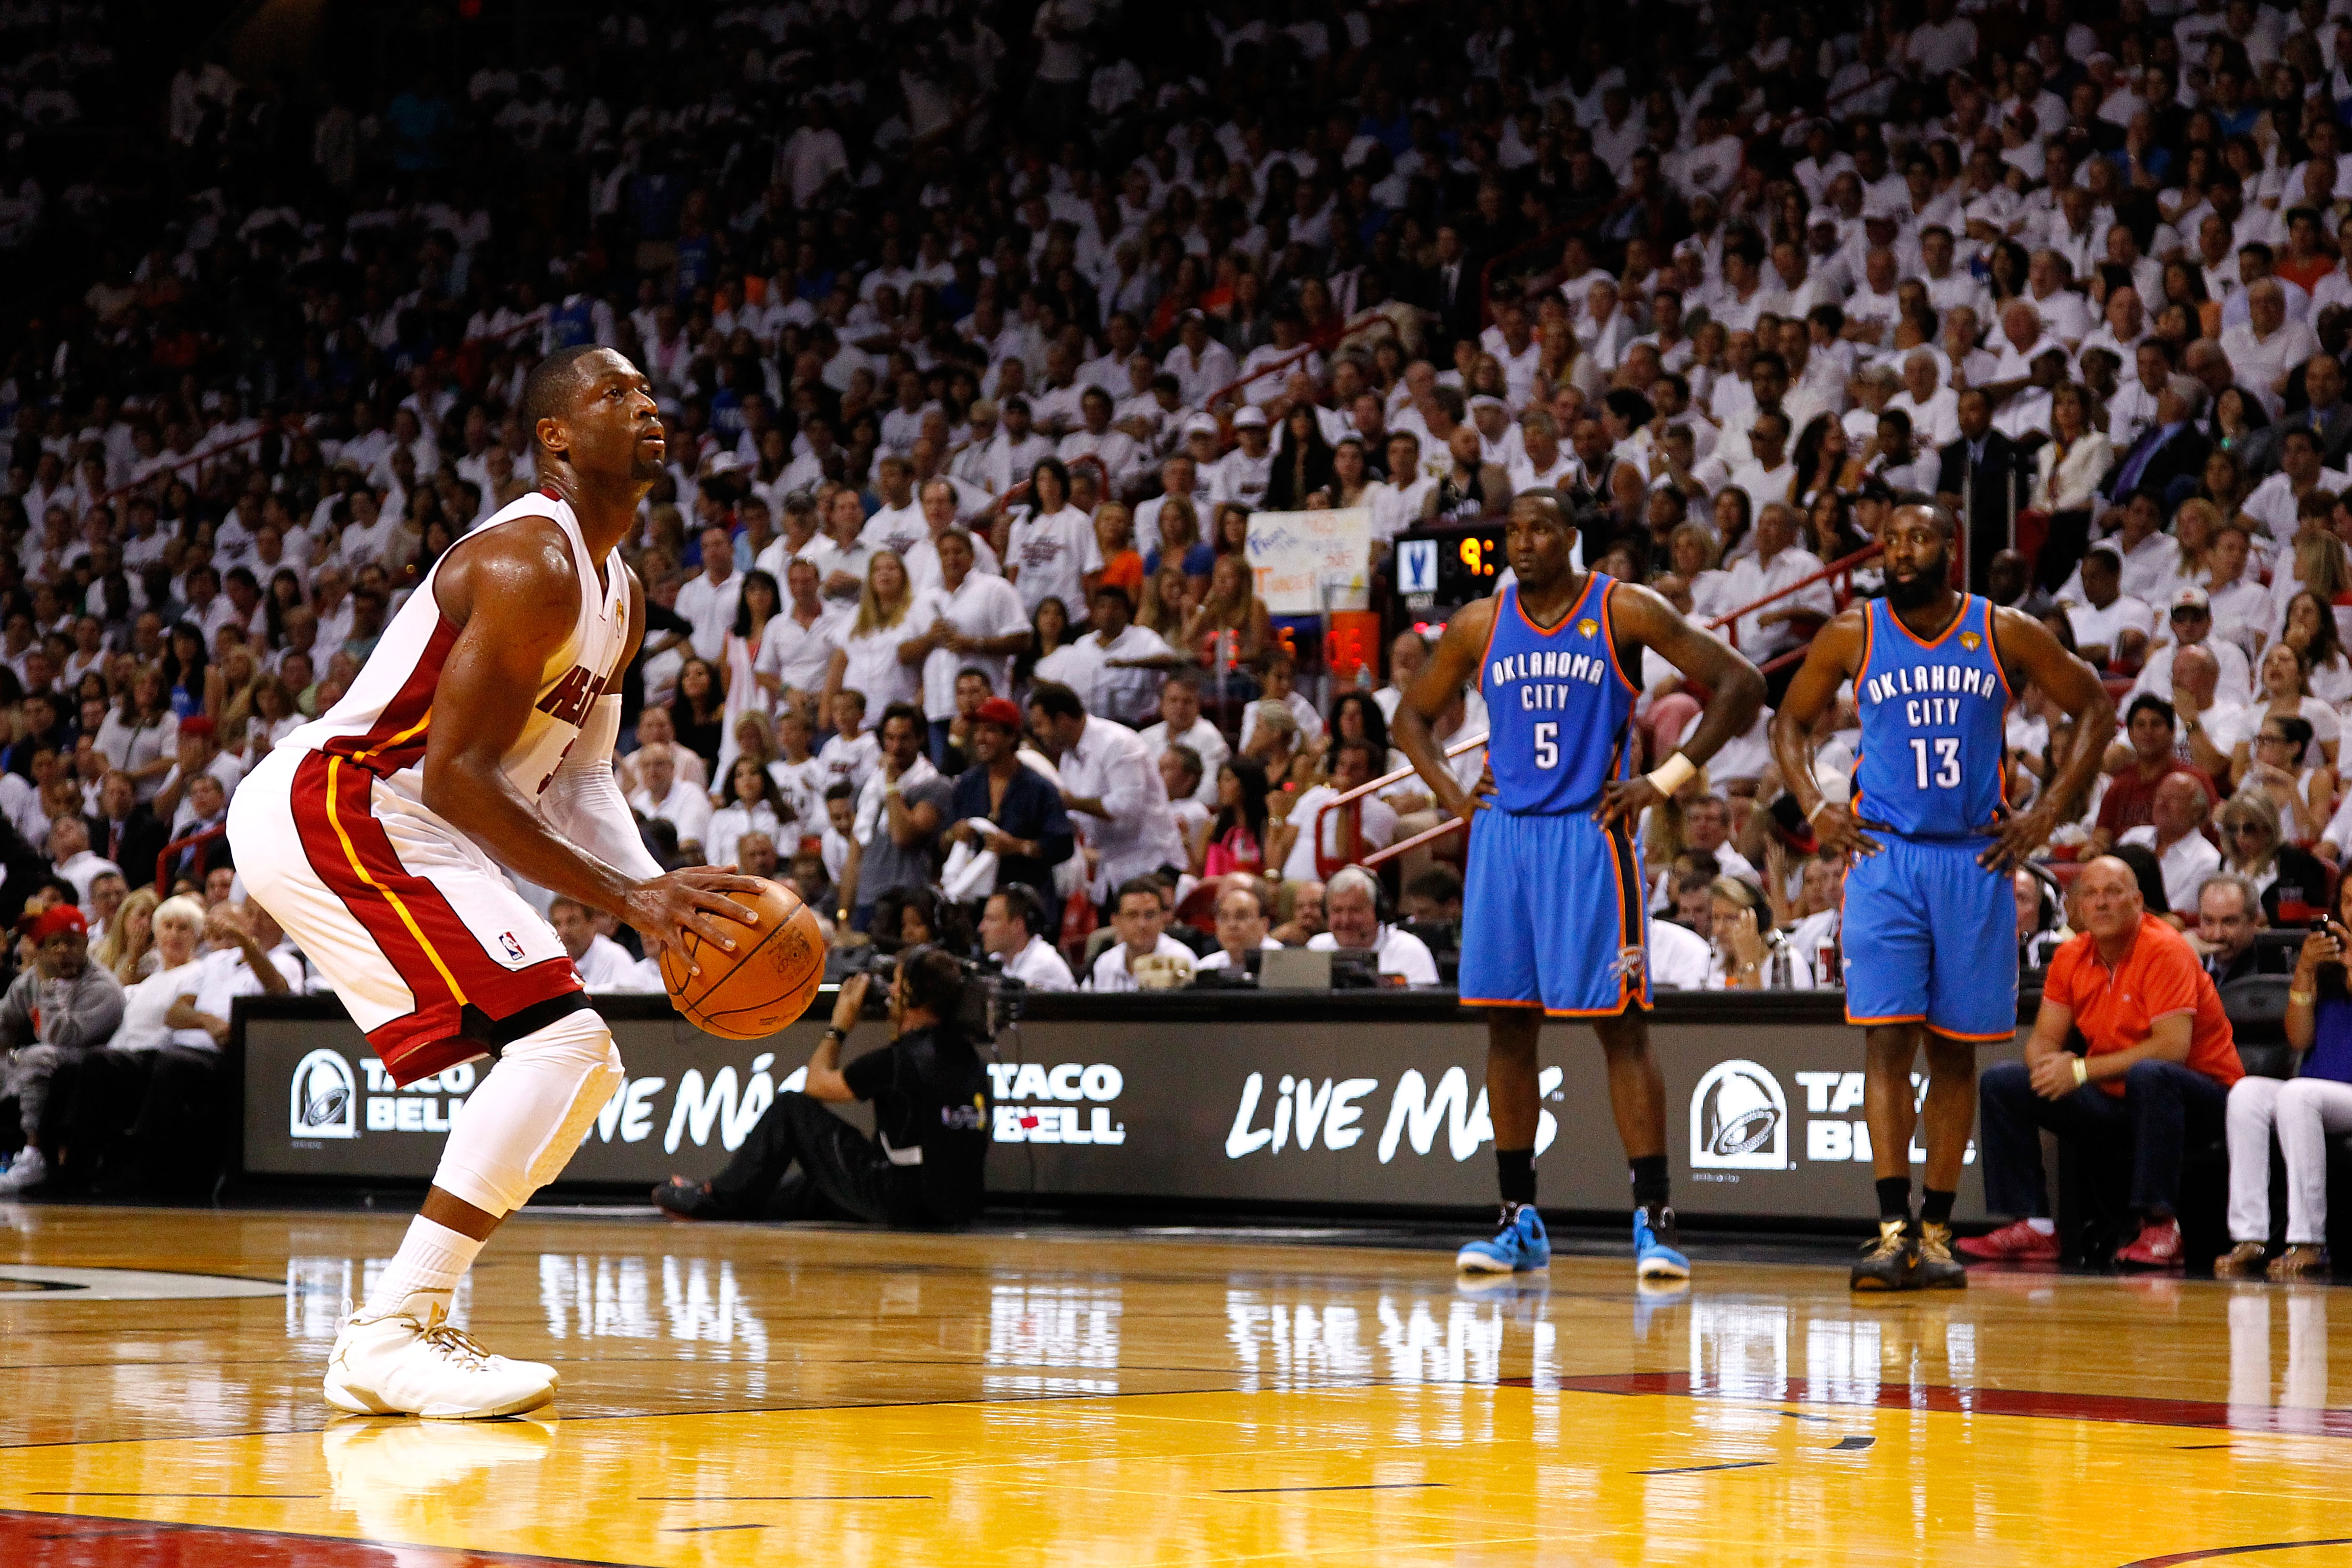 Former Thunder teammates James Harden and Kendrick Perkins watch Dwyane Wade shoot a free throw during the 2012 NBA Finals